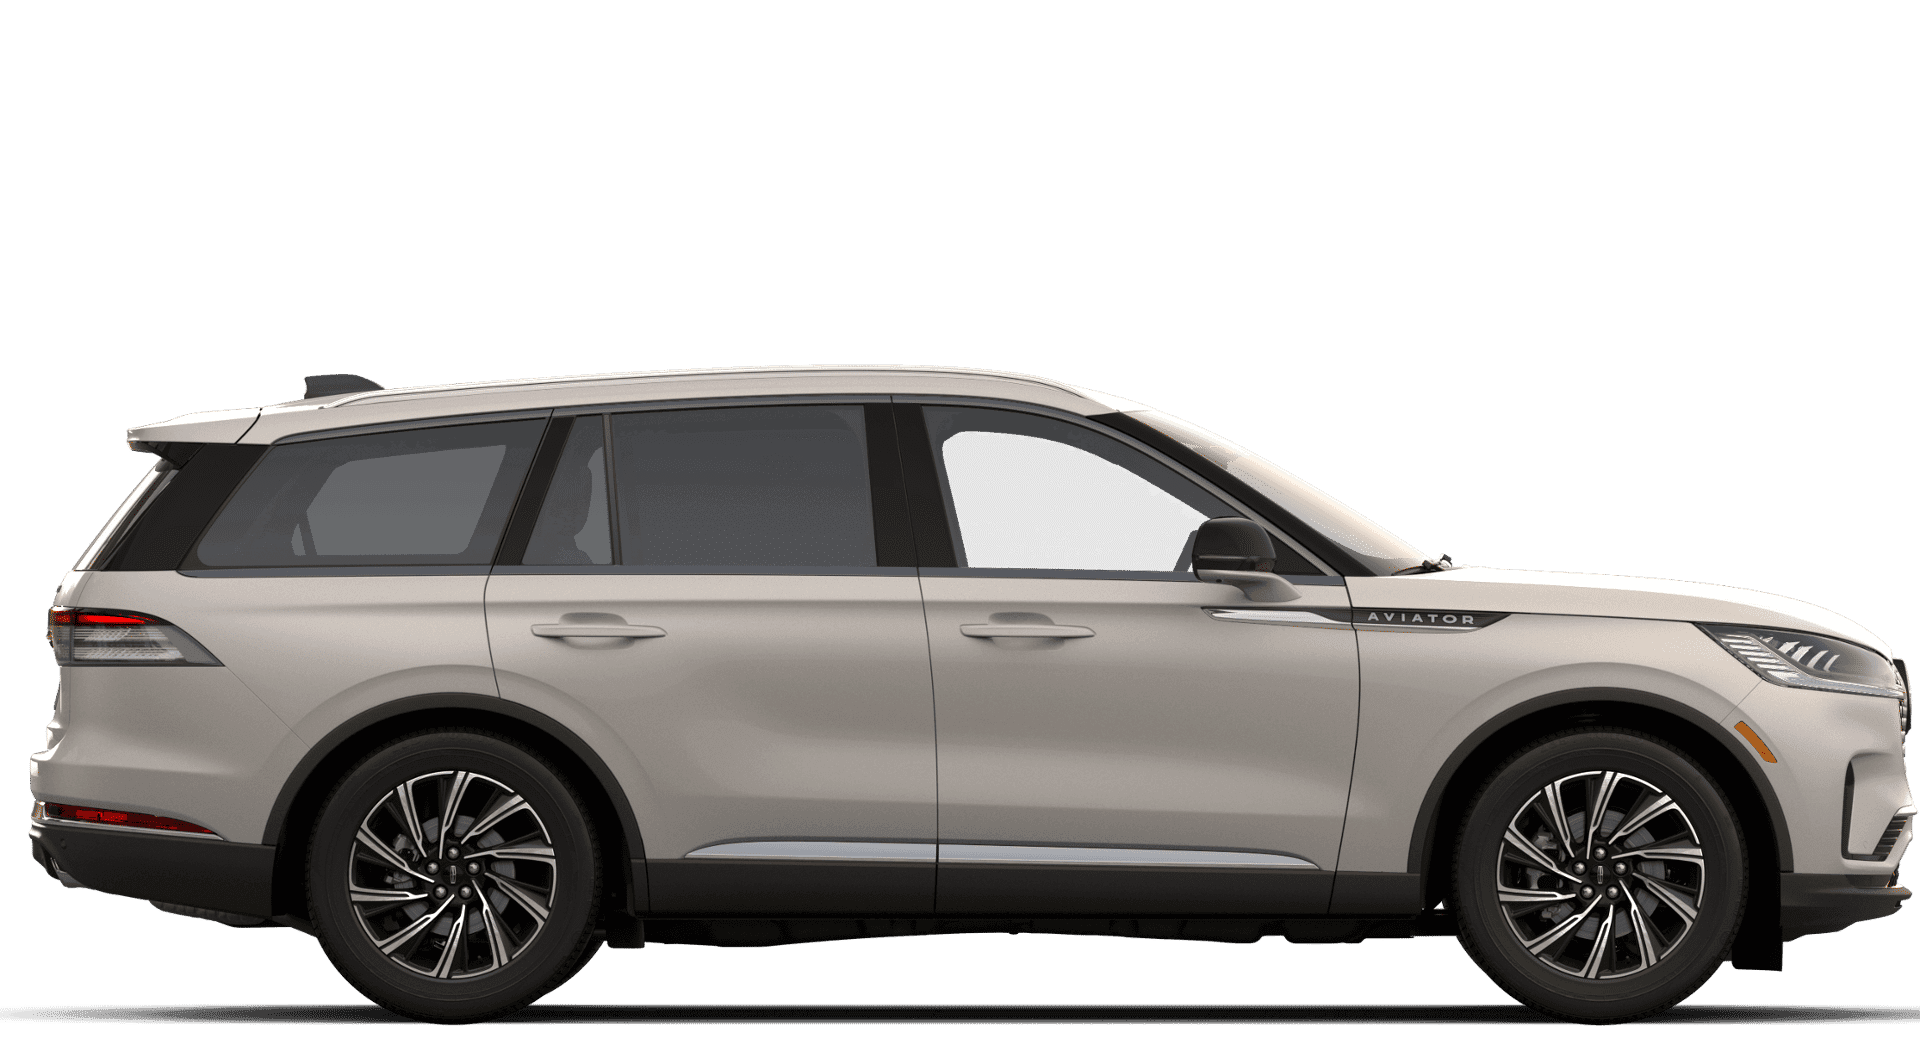 2025 Lincoln Aviator Photo in Bethesda, MD 20814